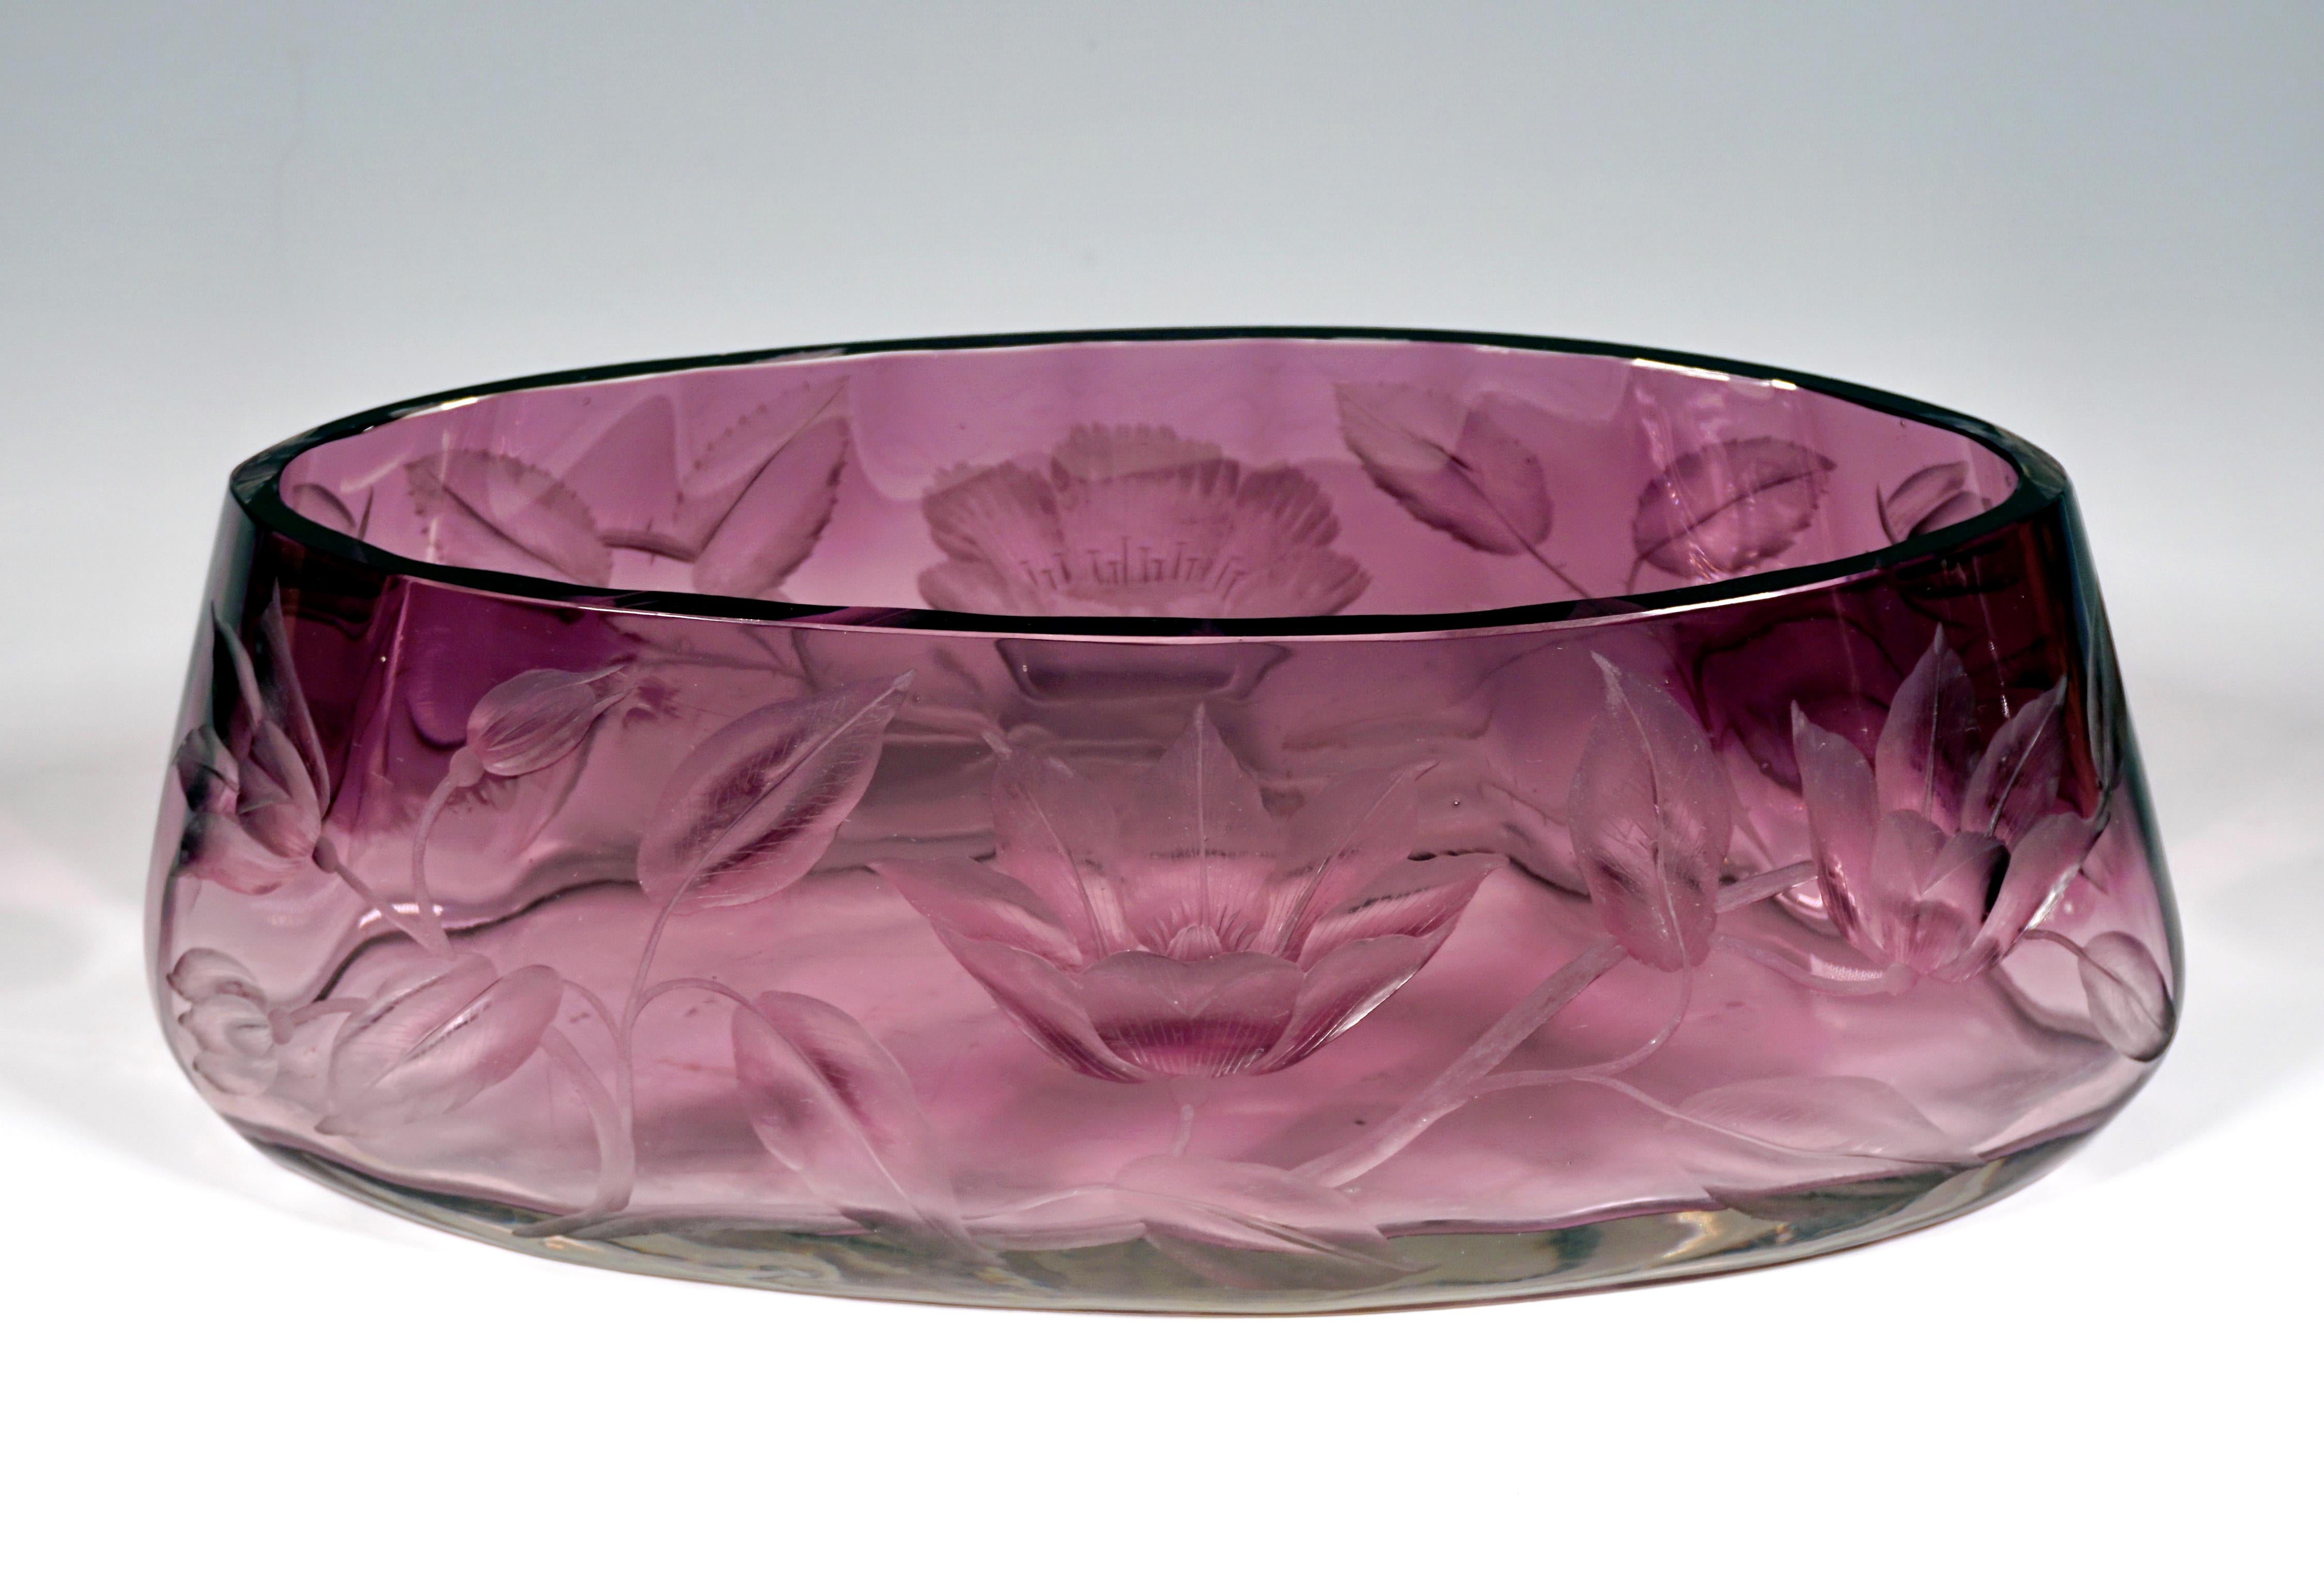 Flat, wide vase with an oval basic shape, walls slightly narrowing towards the top, colorless glass thickened in a wave-shaped manner on the inside, tapering purple towards the top, with surrounding, deeply cut rose, flower and leaf tendril